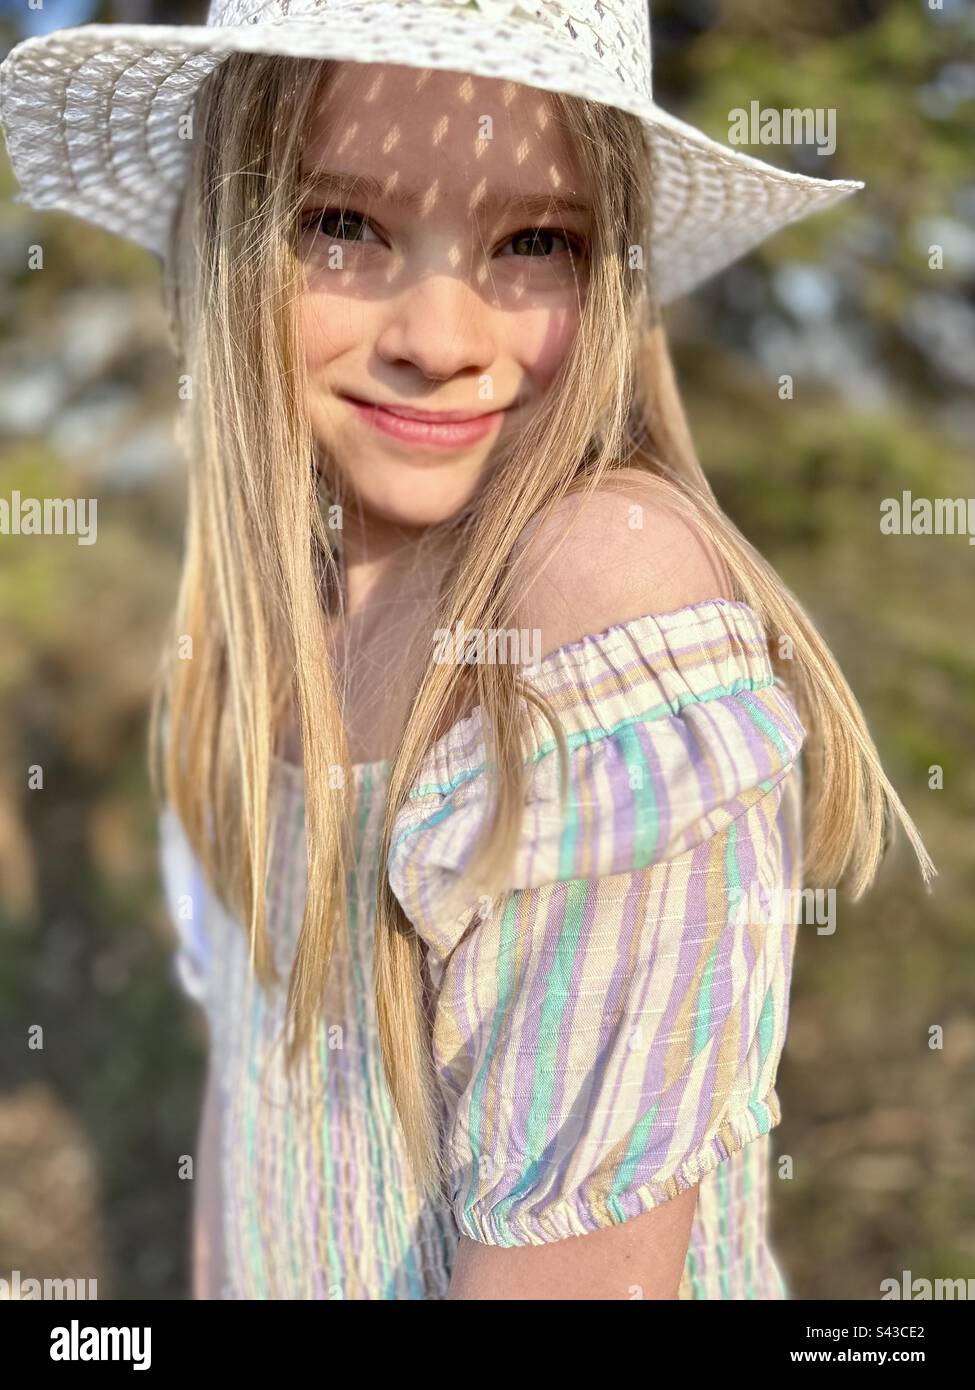 Eight year old girl smiling in the sunshine Stock Photo